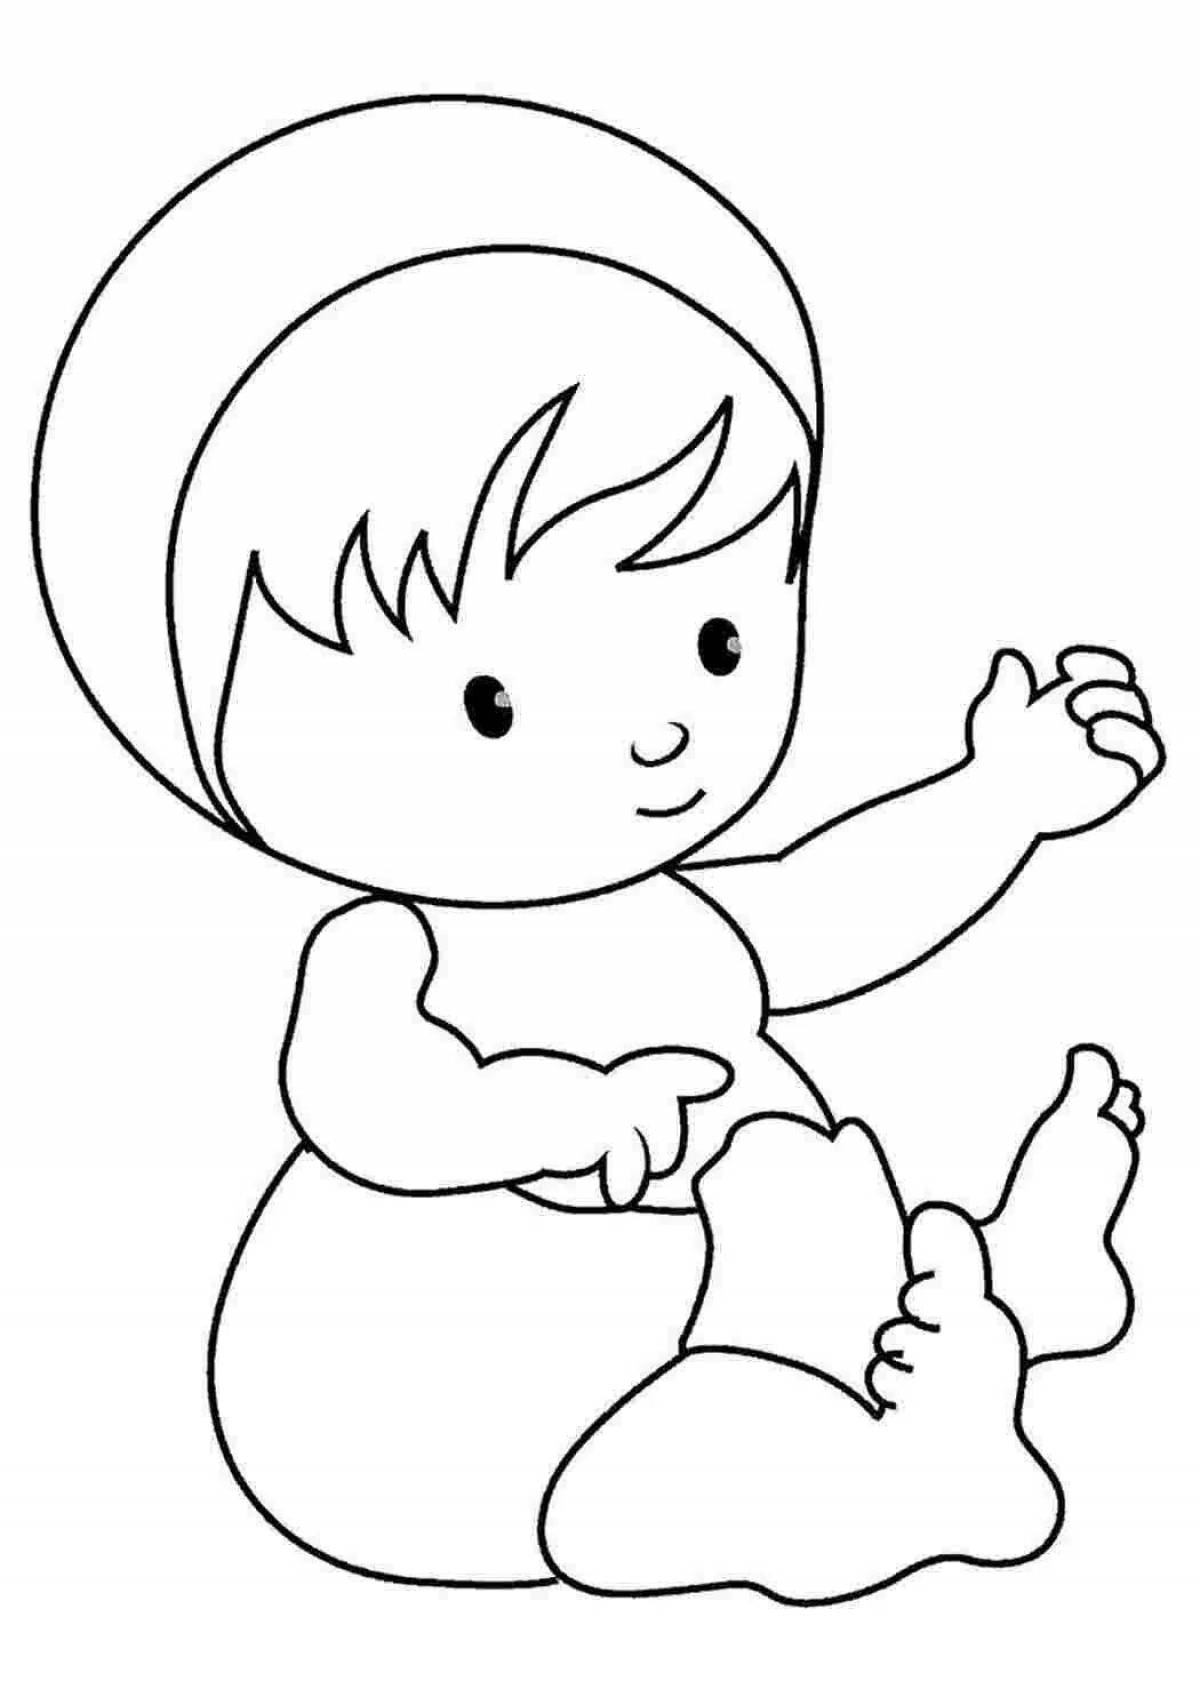 Colourful coloring pages for children